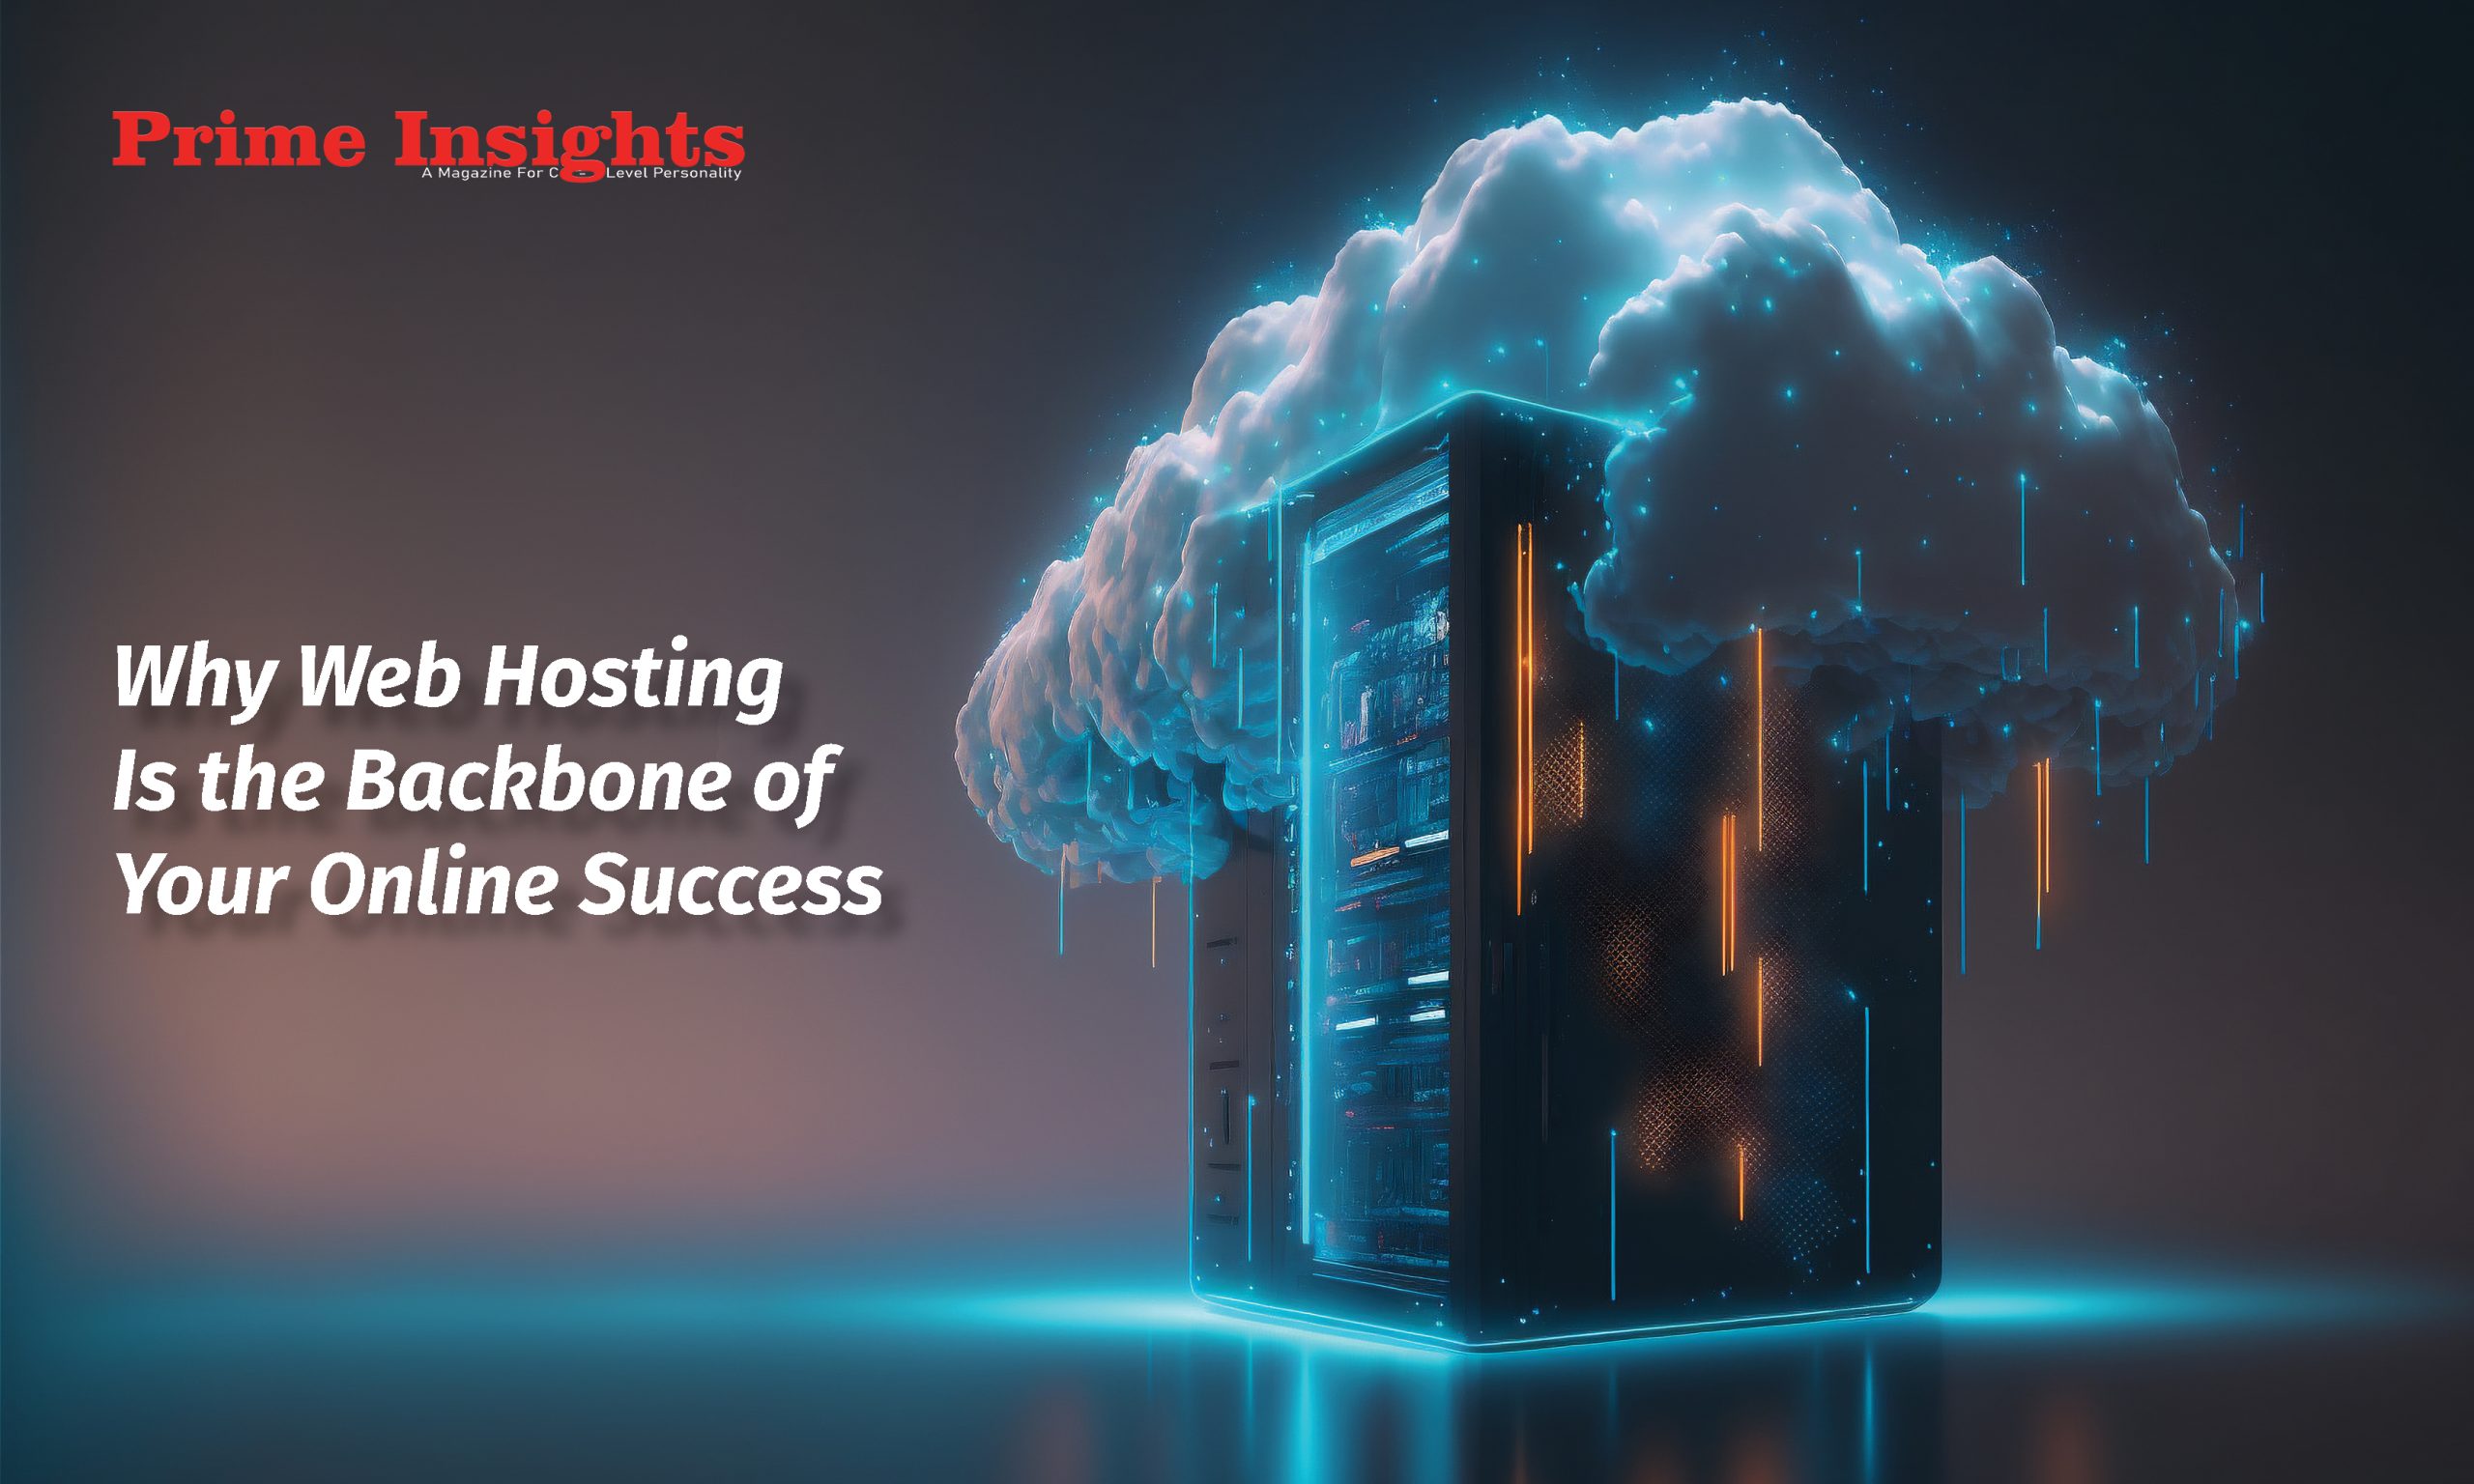 Why Web Hosting Is the Backbone of Your Online Success